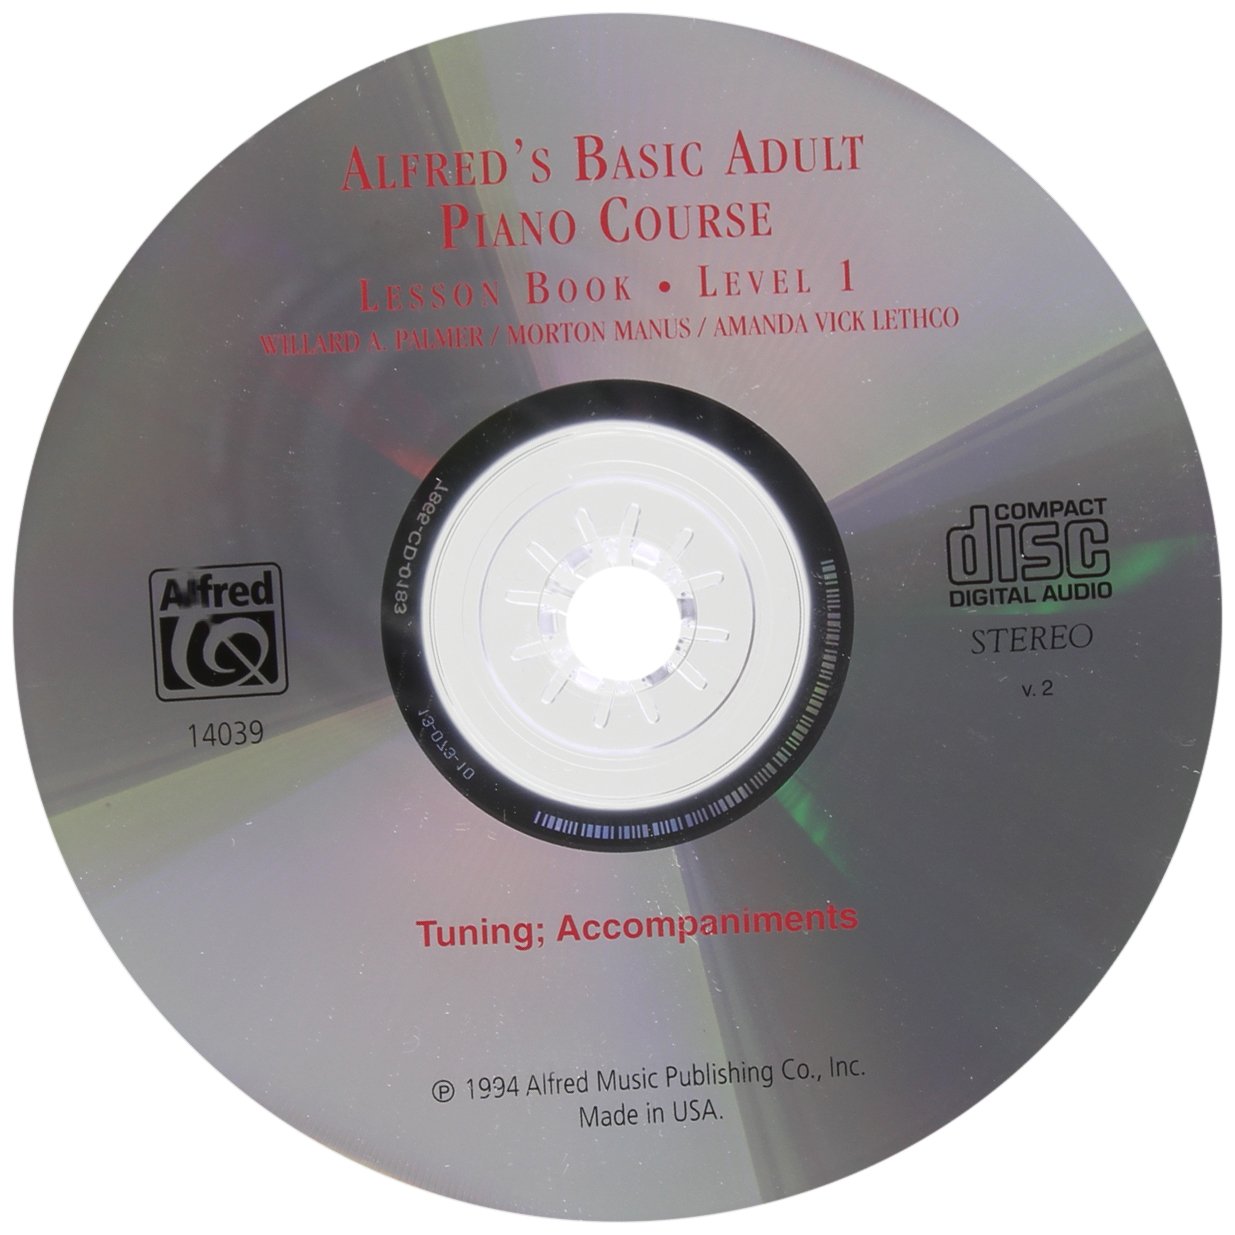 Alfred's Basic Adult Piano Course CD for Lesson Book: Level 1